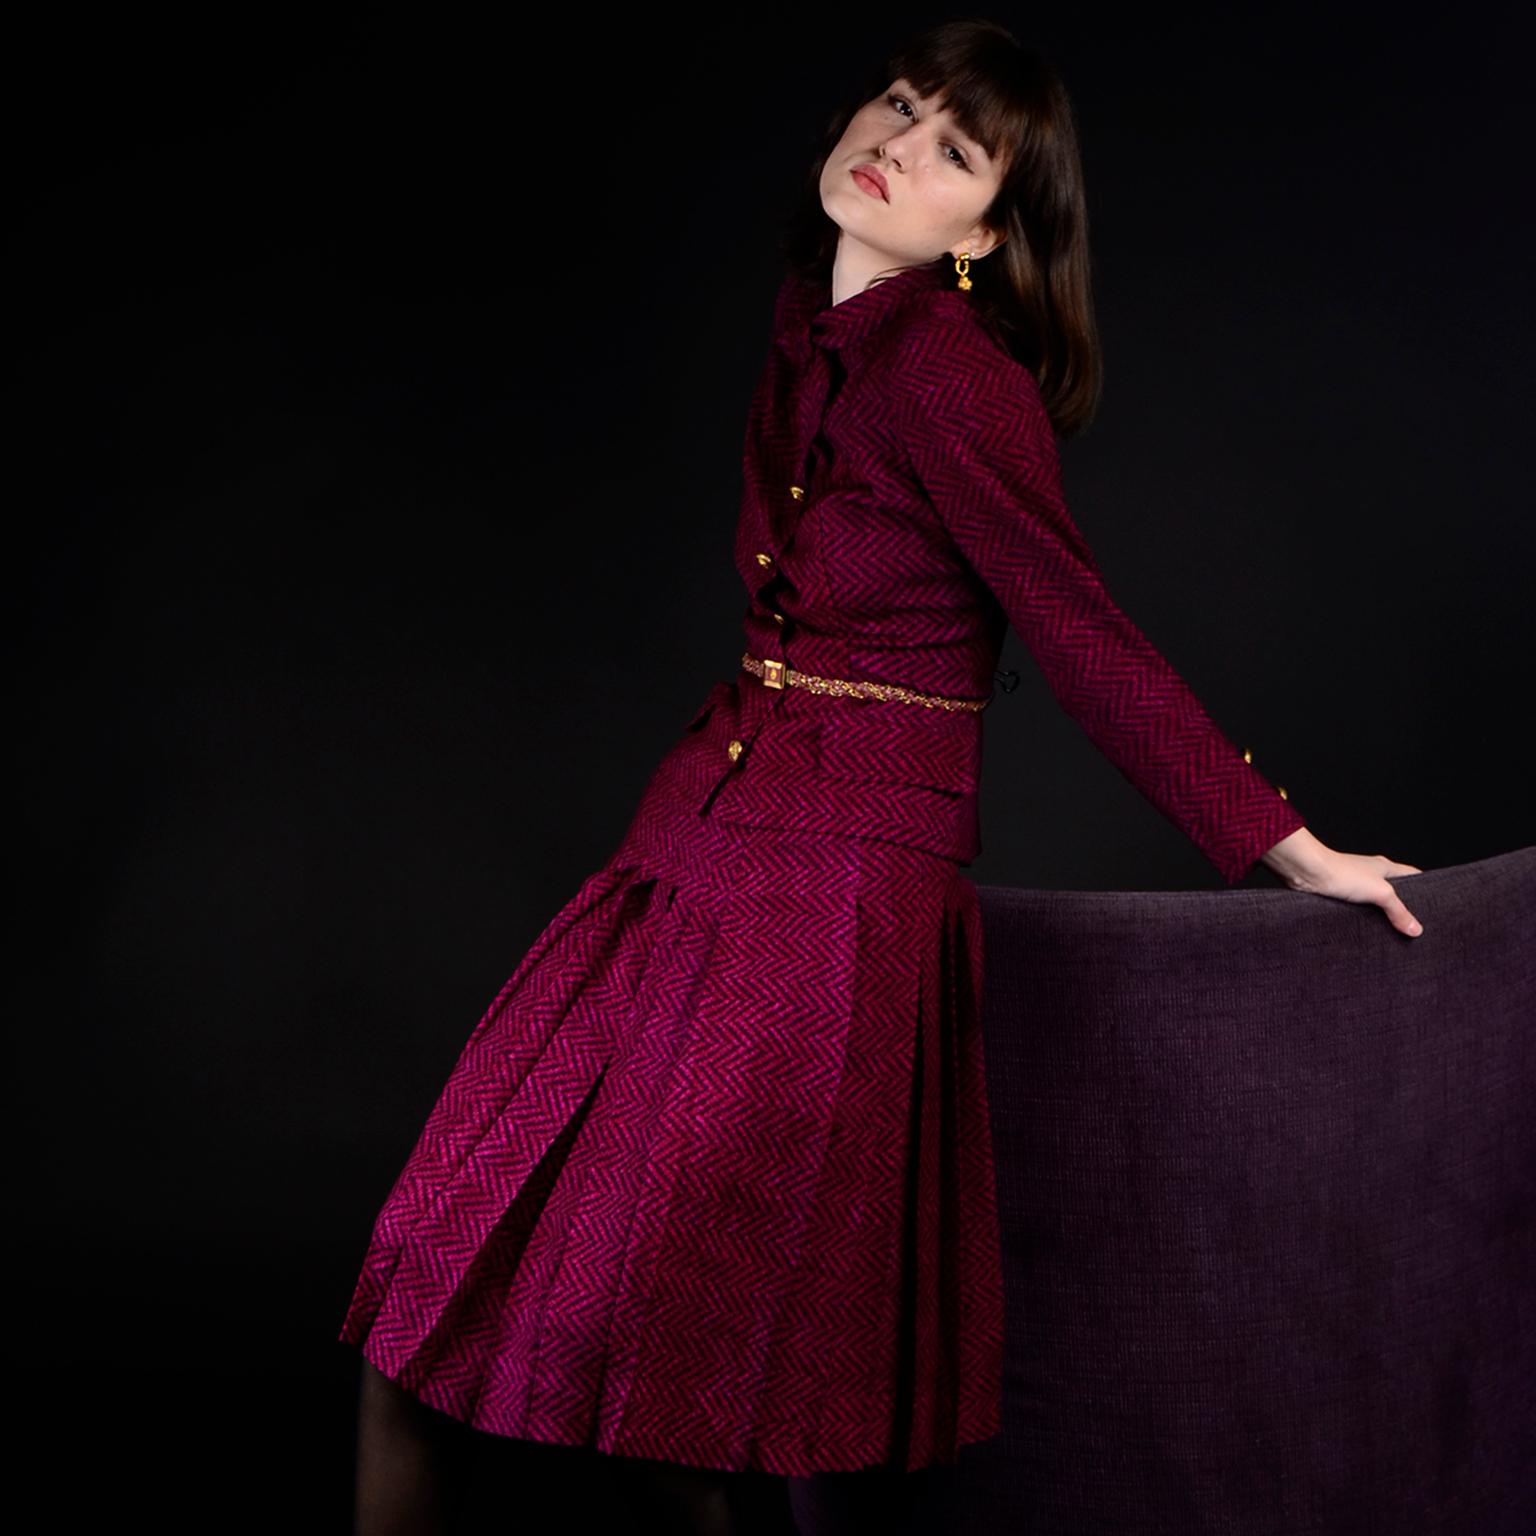 This outstanding vintage celebrity owned Chanel Couture jacket top and skirt suit is in a sublime magenta and plum purple chevron lightweight wool challis with a braided leather belt. Though this is technically a suit, it feels more like a blouse